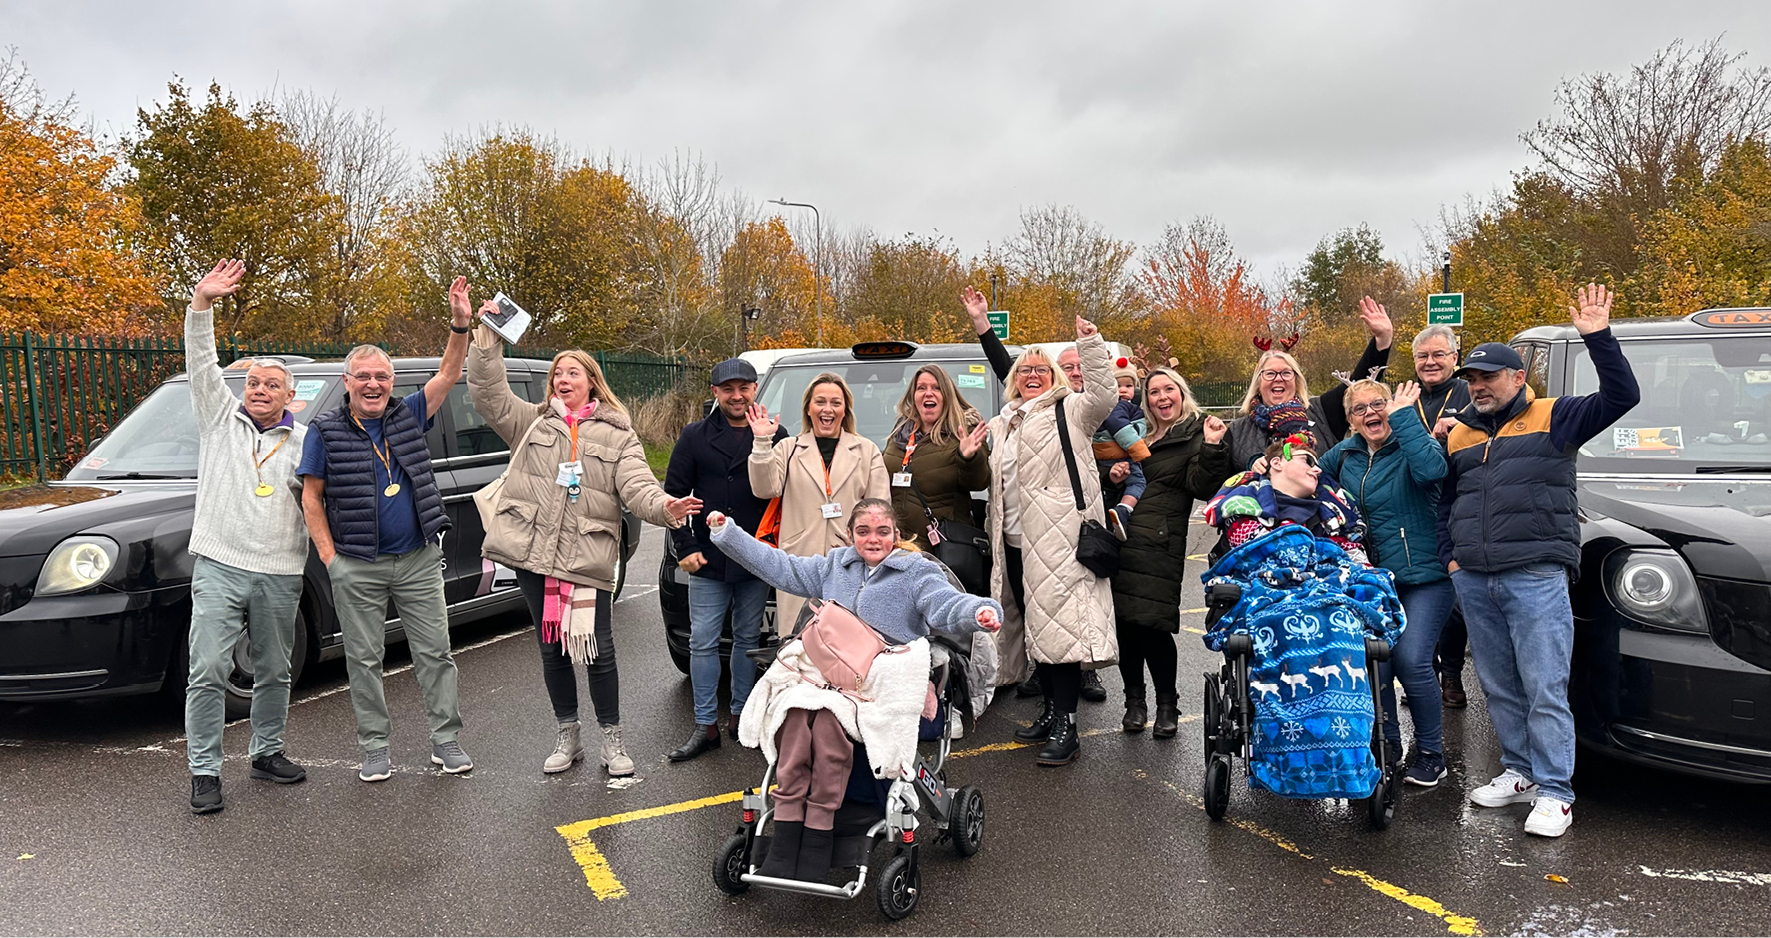 How ellenor is Making Children’s “Winter Wishes” Come True This Christmas – With Some Help from Local Black Cabbies!